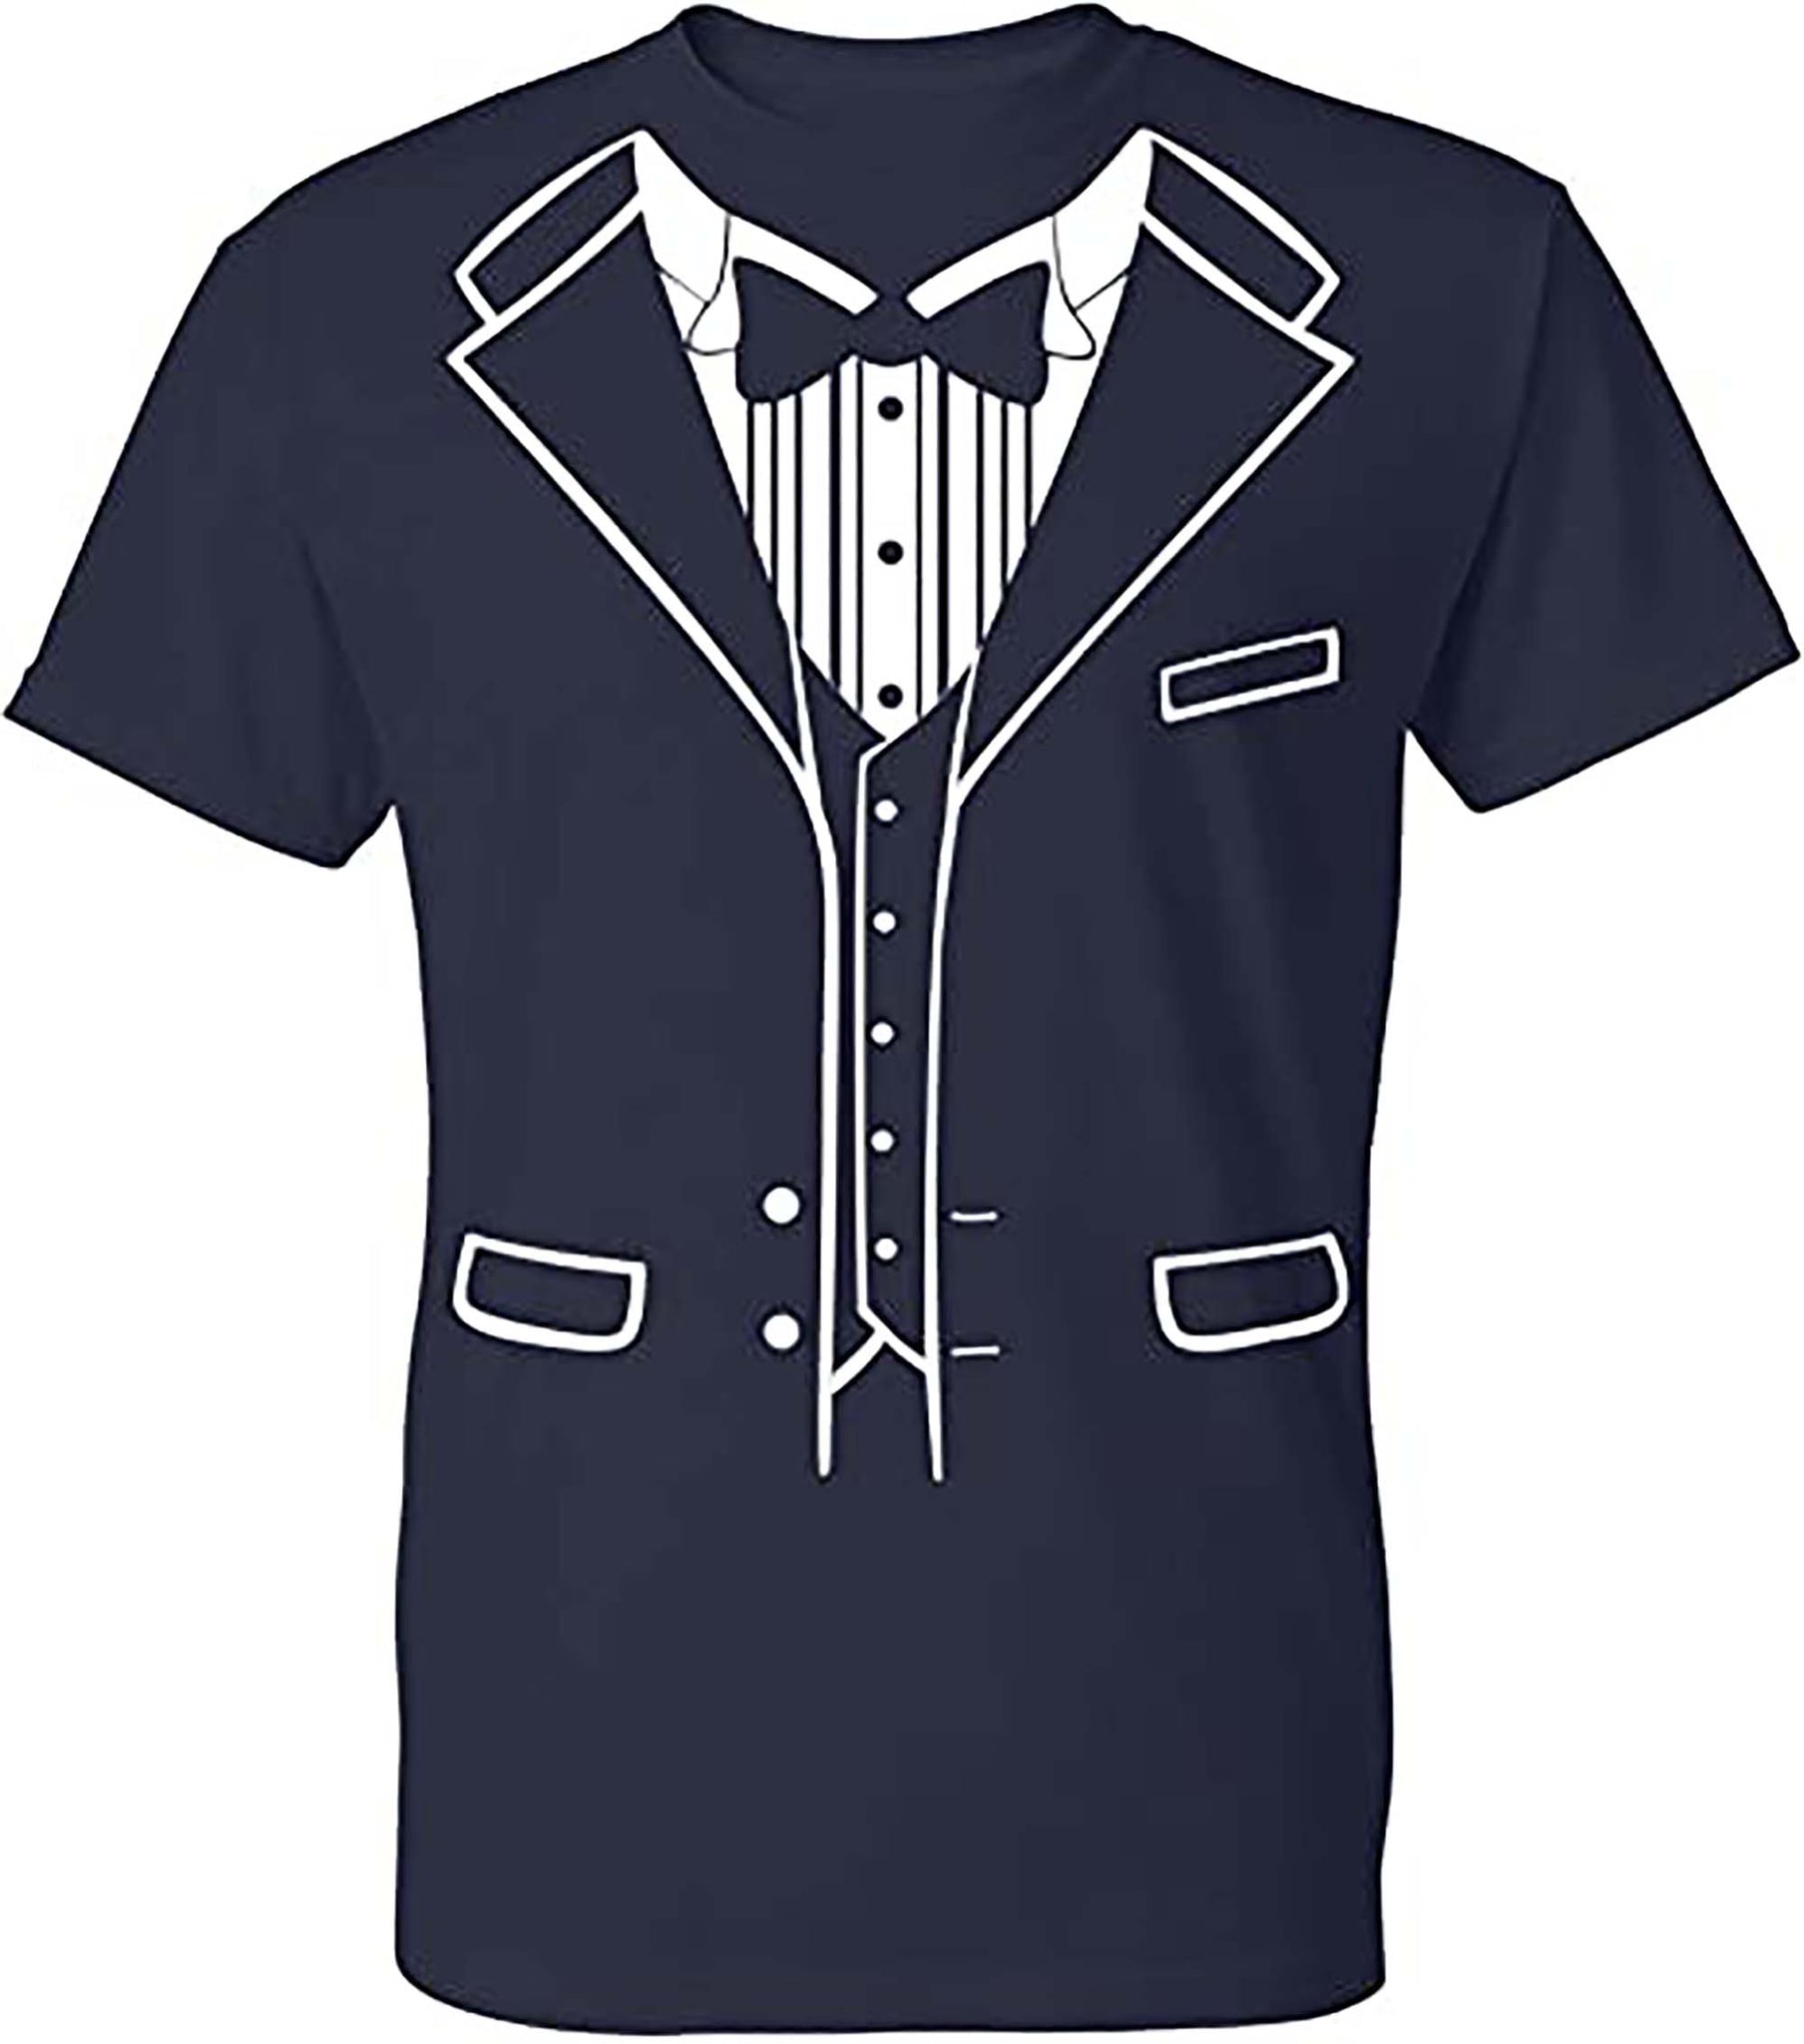 Tuxedo Classic with Bowtie Party Wedding Mens T-Shirt-black